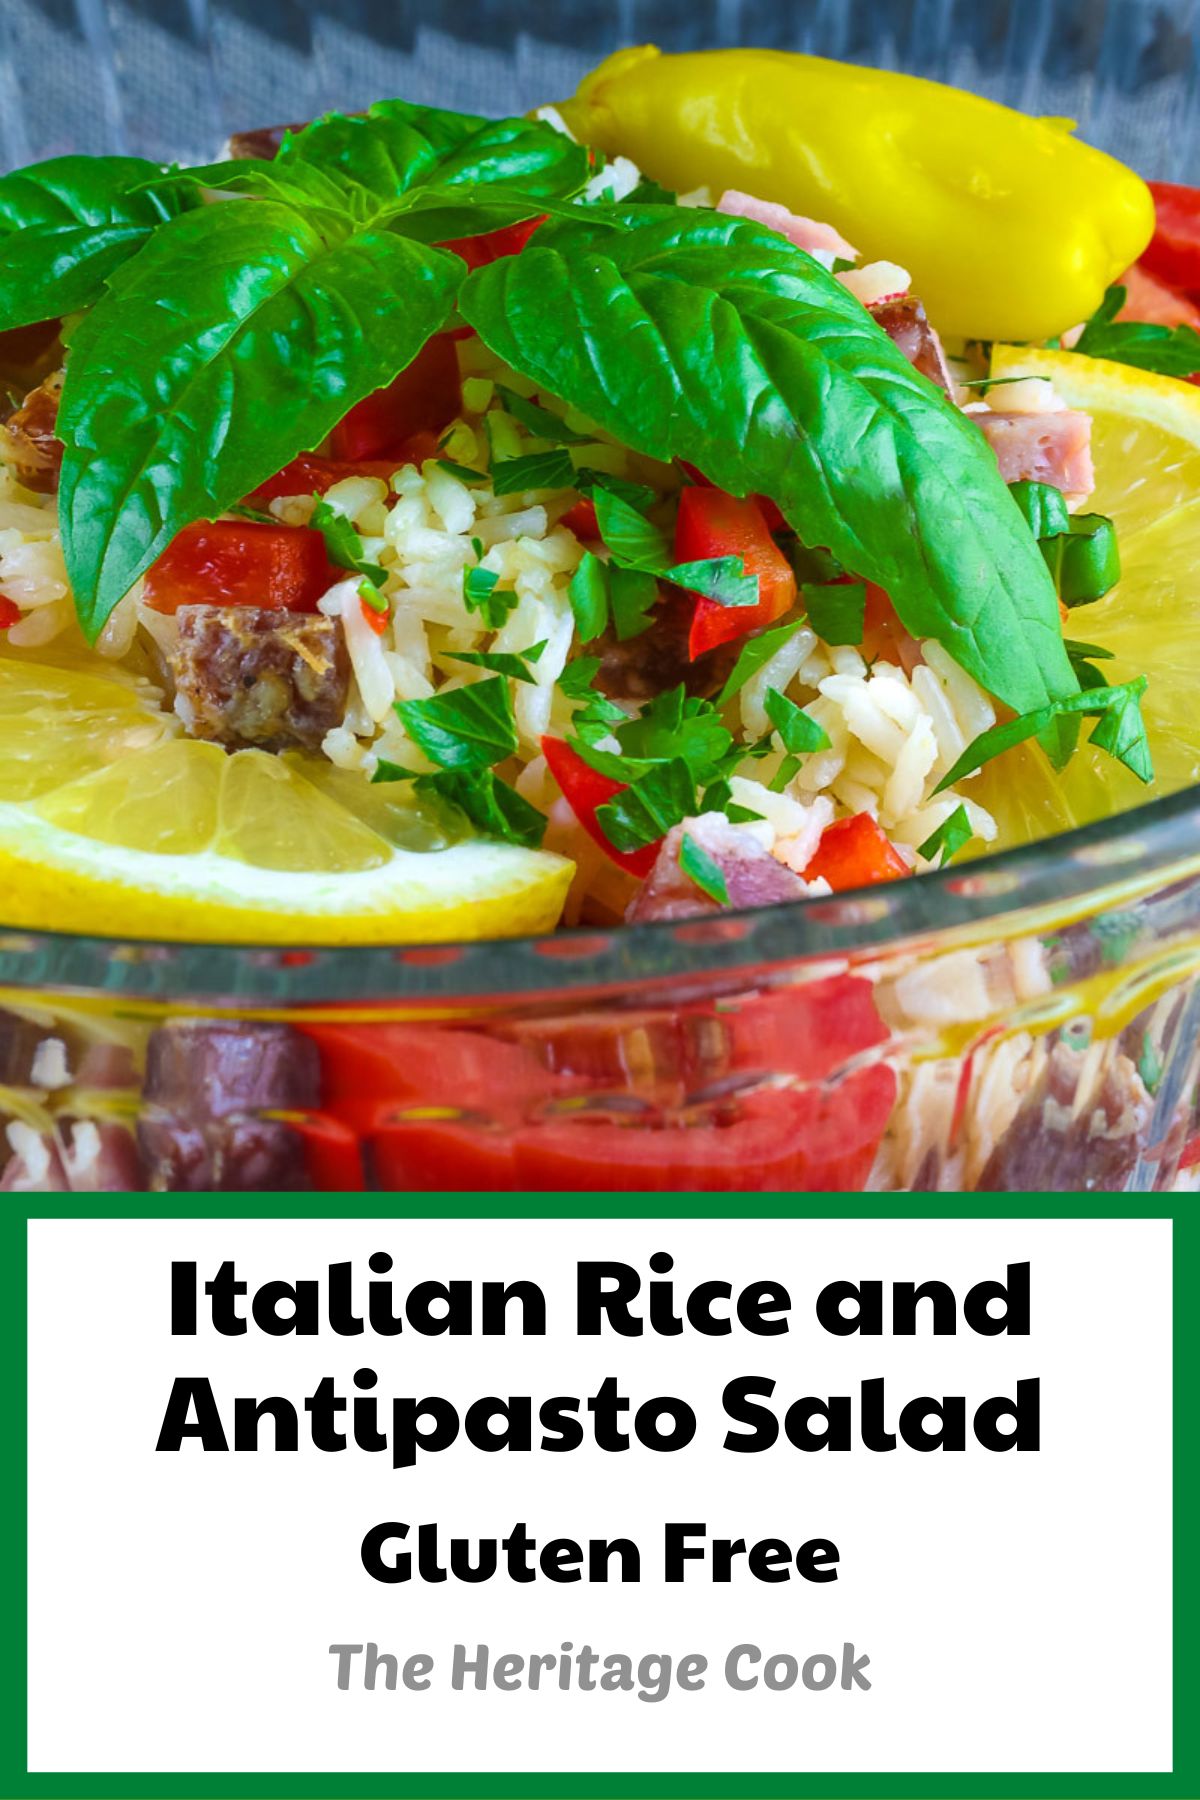 Bowl of rice studded with Italian meats, vegetables, pepperoncini, cheese, and basil - Italian Rice and Antipasto Salad GF © 2022 Jane Bonacci, The Heritage Cook.